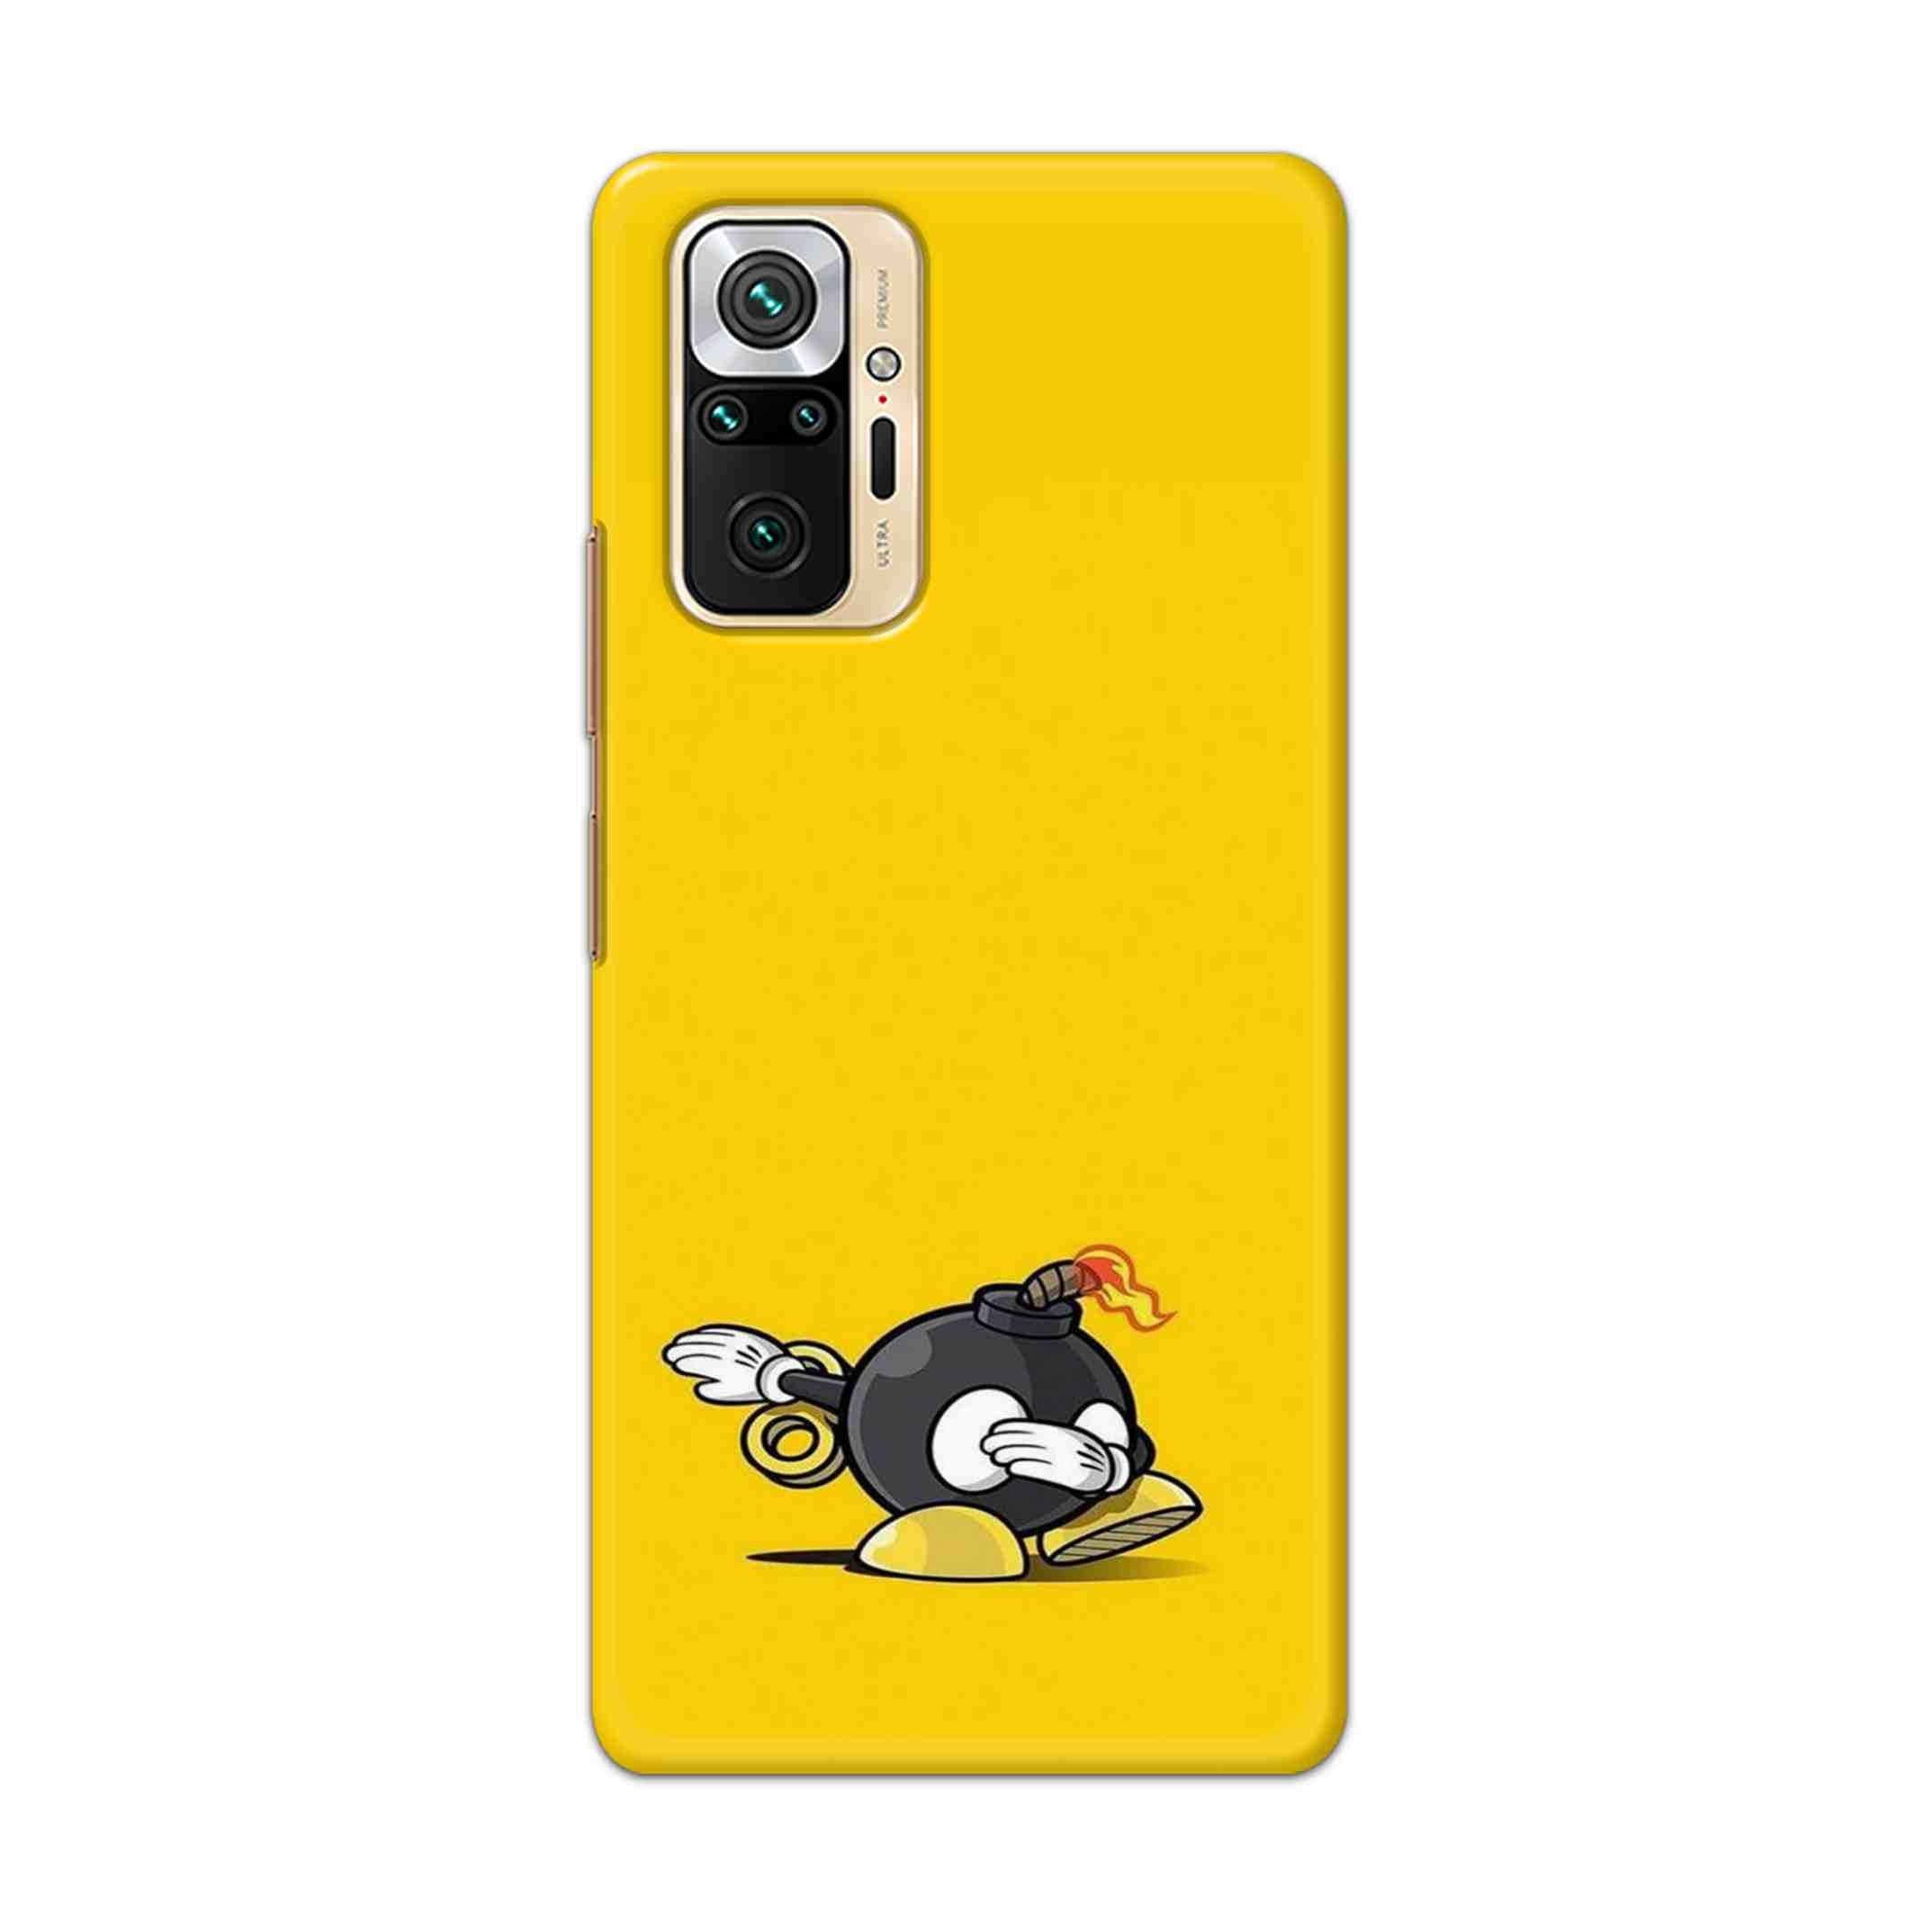 Buy Dashing Bomb Hard Back Mobile Phone Case Cover For Redmi Note 10 Pro Online